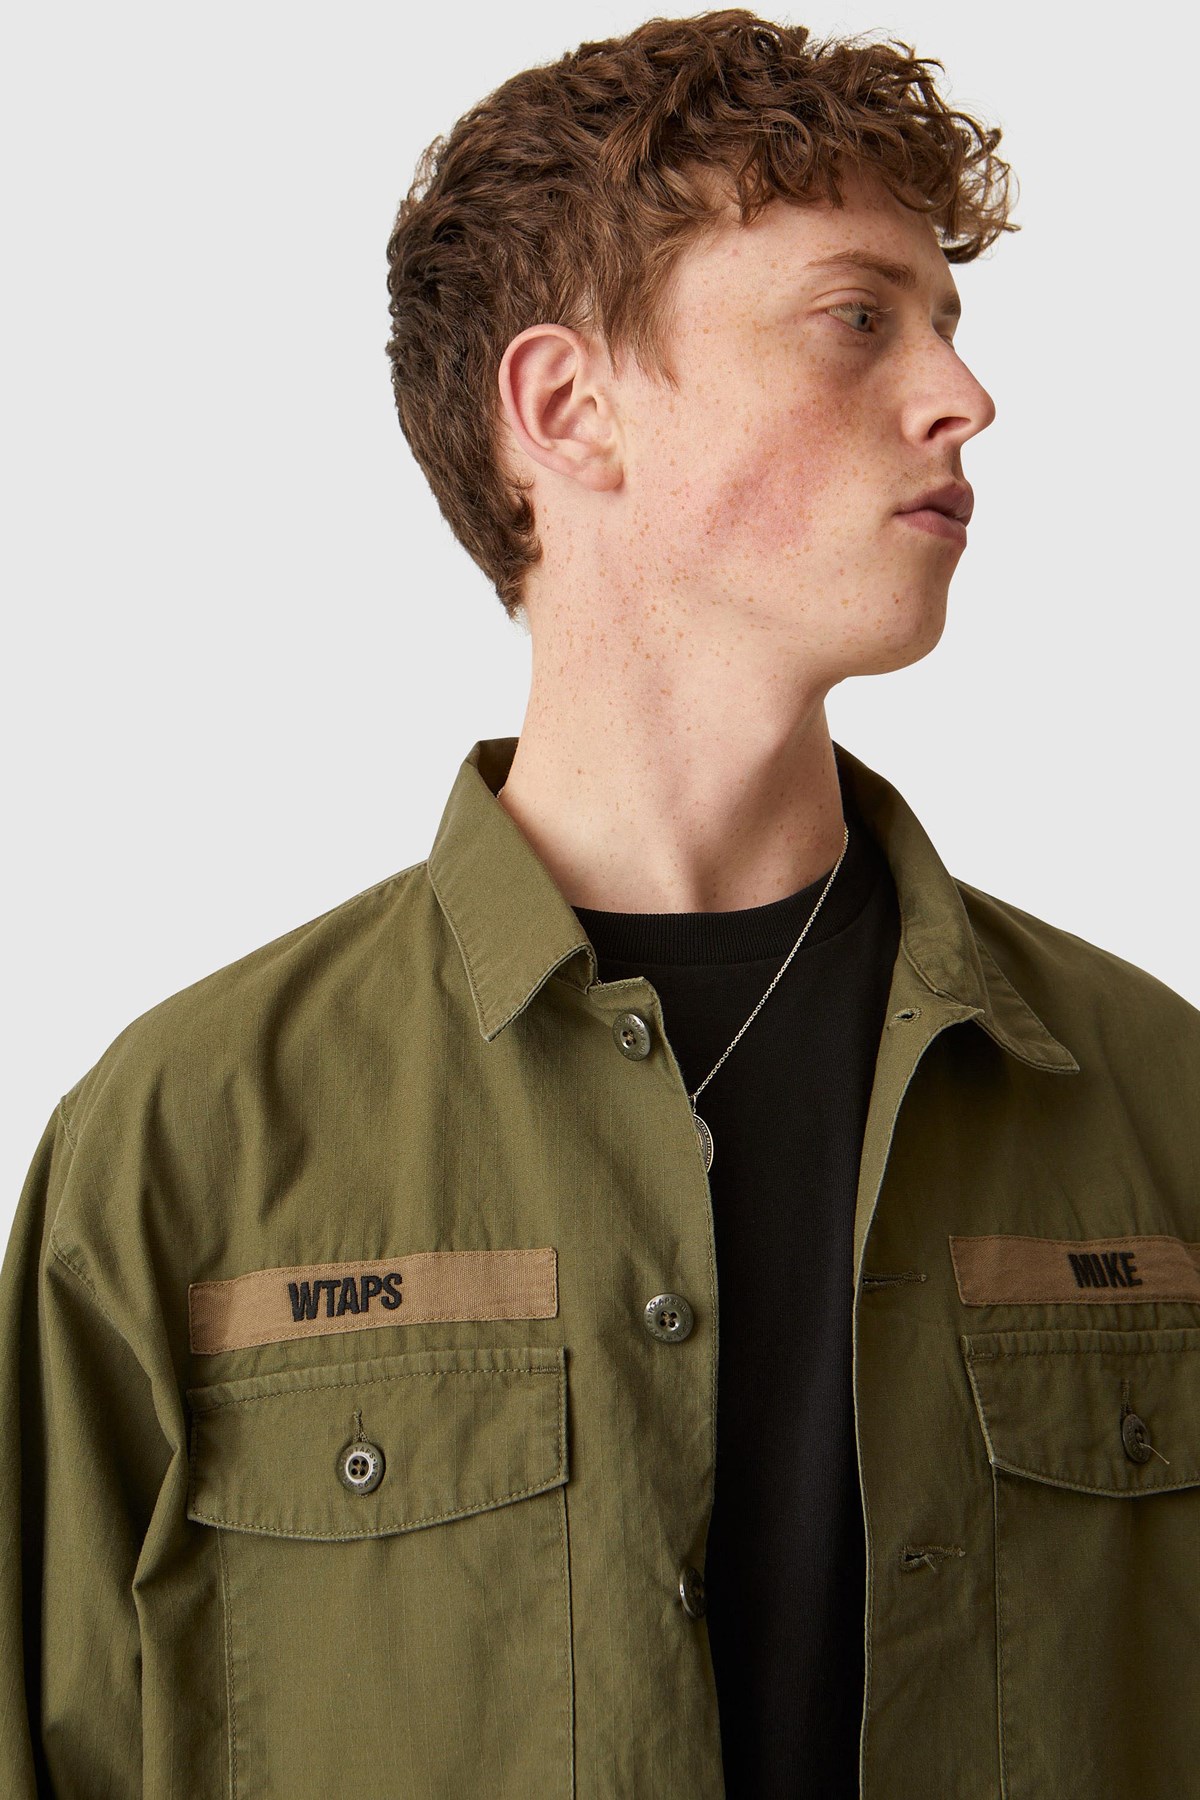 S Wtaps BUDS COTTON. SERGE Coyote Brown-